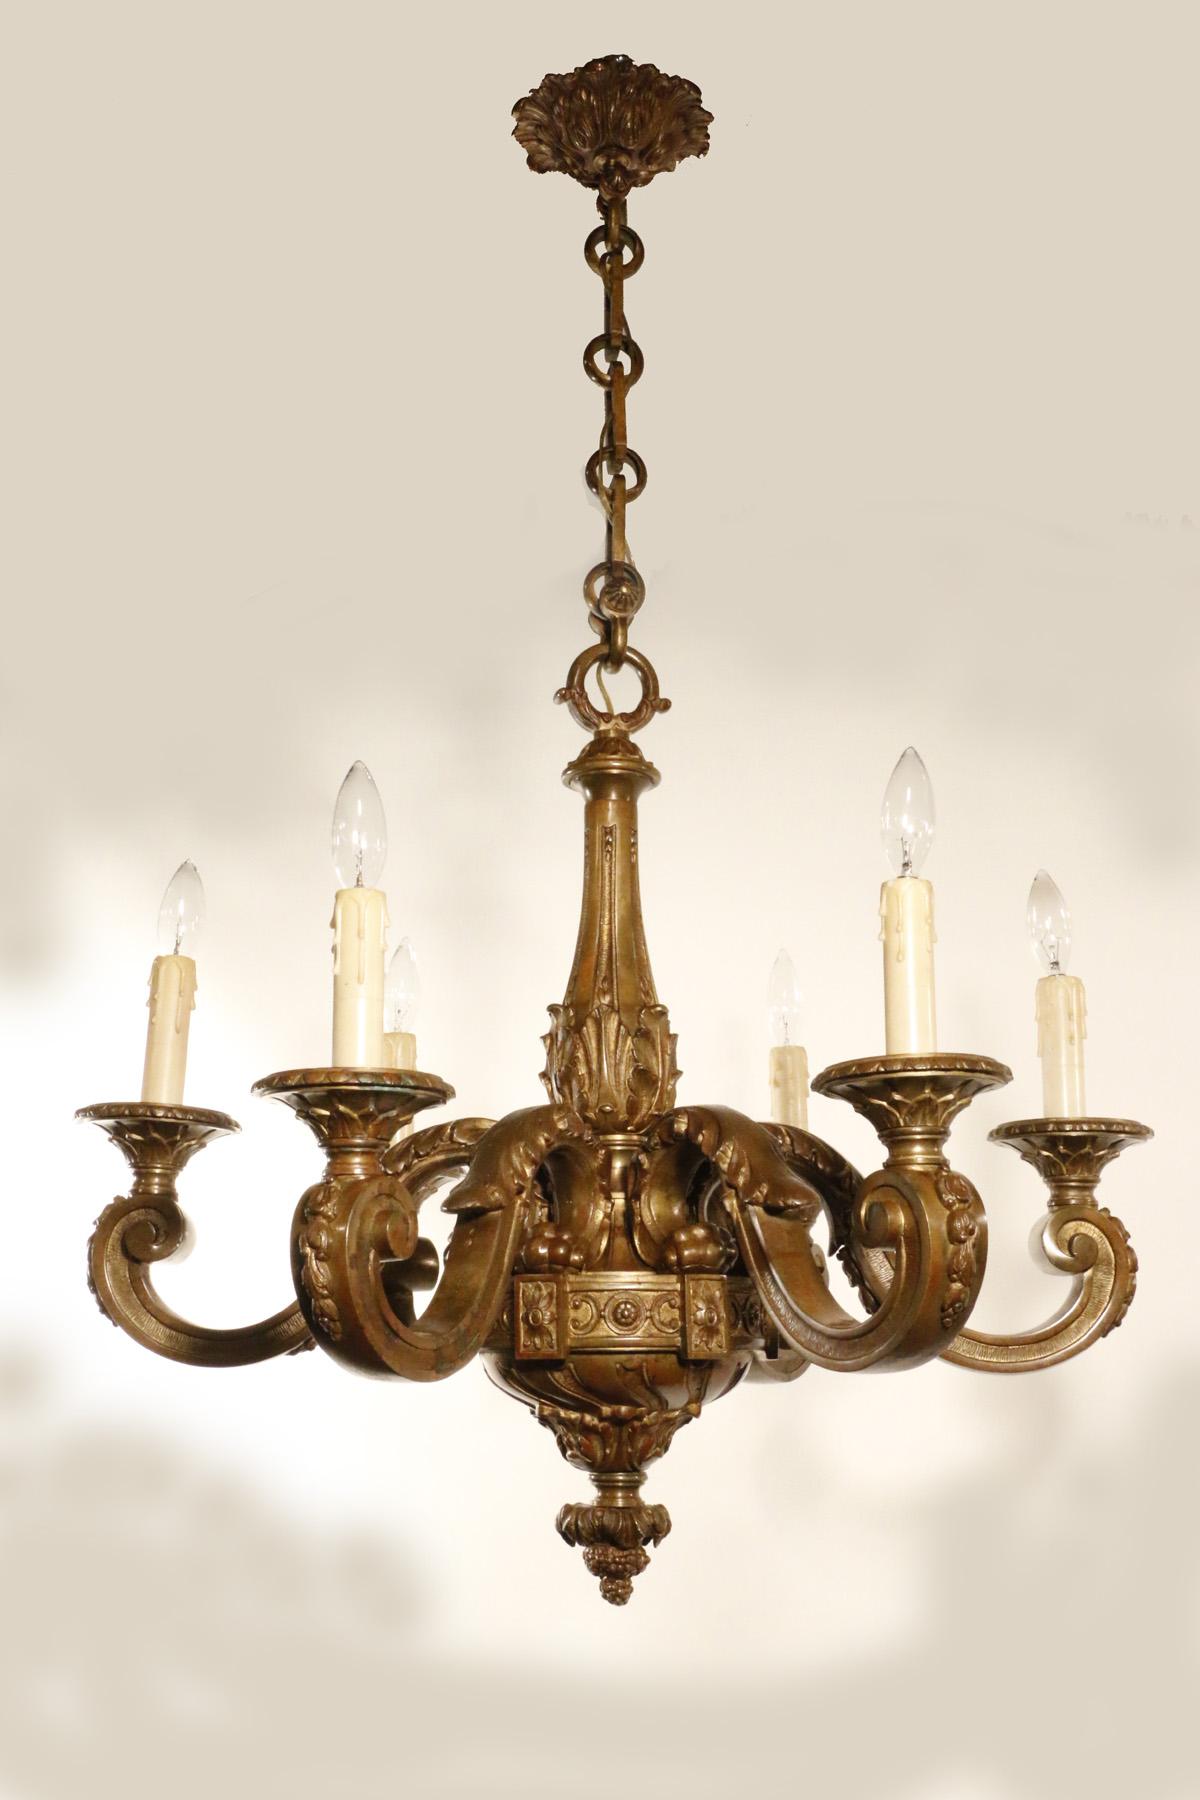 This high-quality chandelier is well modelled and crisply cast. The arms are applied with stylized acanthus, as is the fluted tapering stem. The lower finial is decorated with acuthus leaf and clusters of grapes.